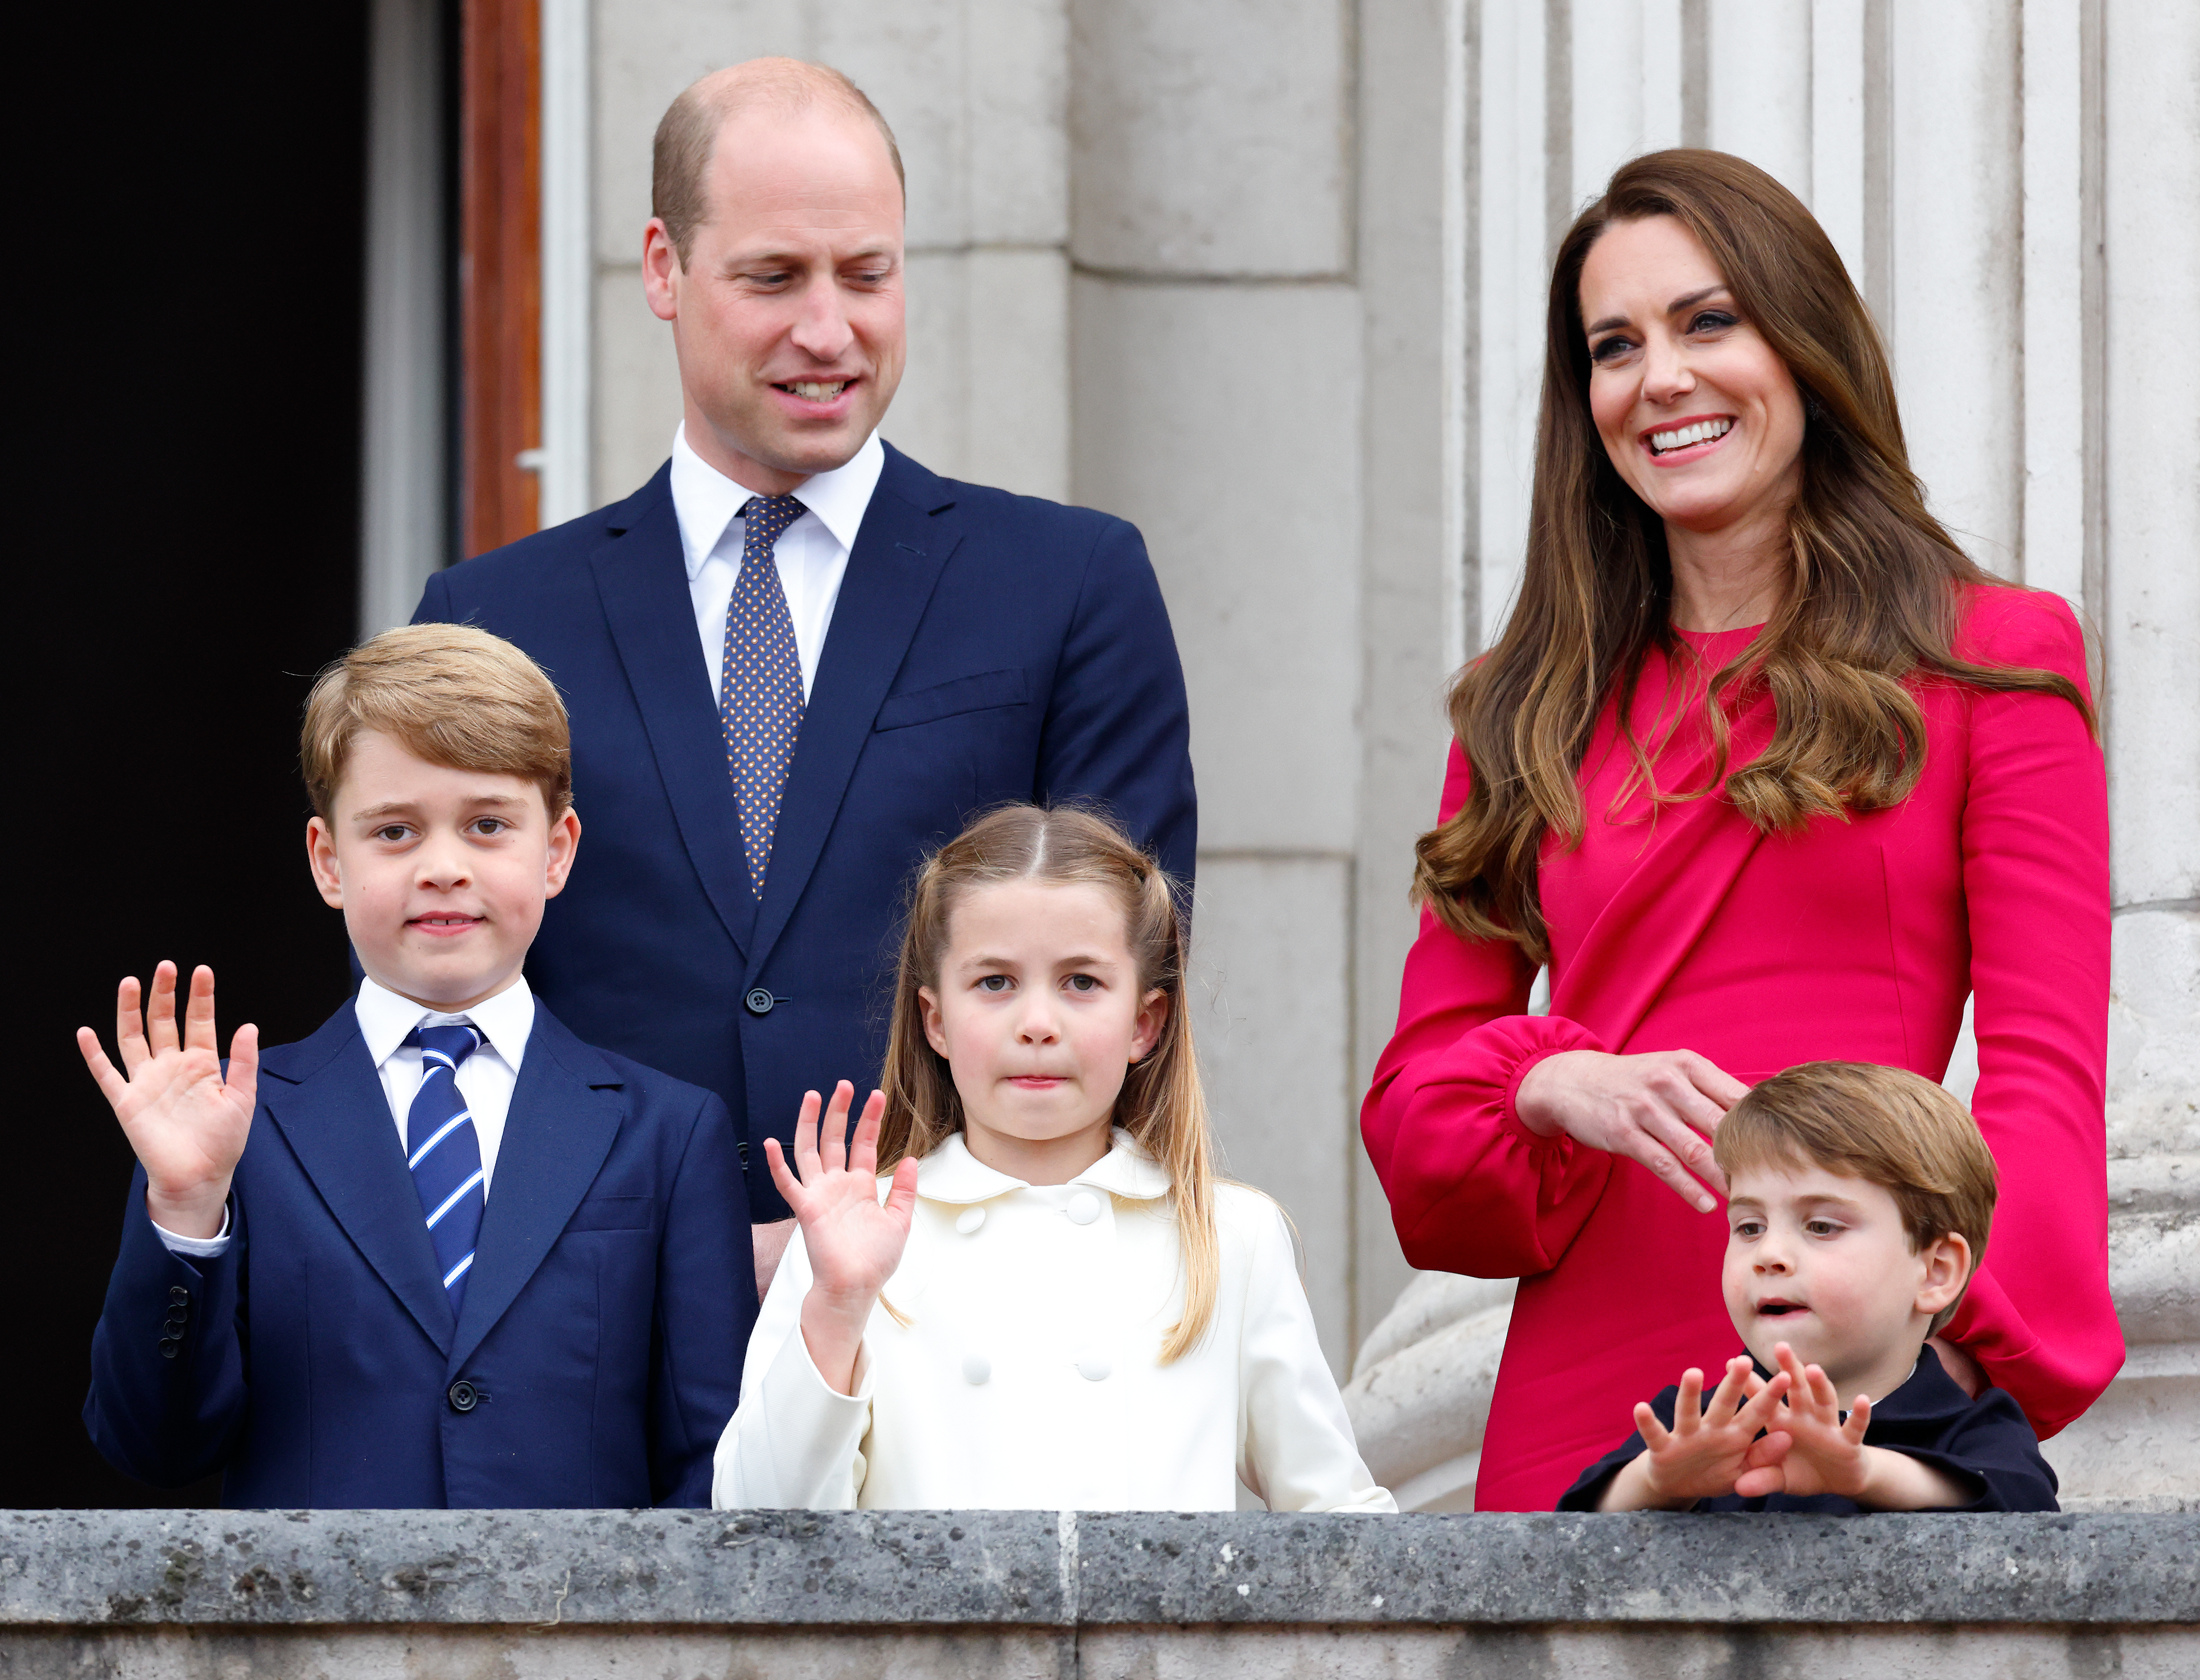 Princess Catherine and Prince William with their children, Princess Charlotte, Prince George, and Prince Louis Platinum Pageant on June 5, 2022 in London, England | Source: Getty Images